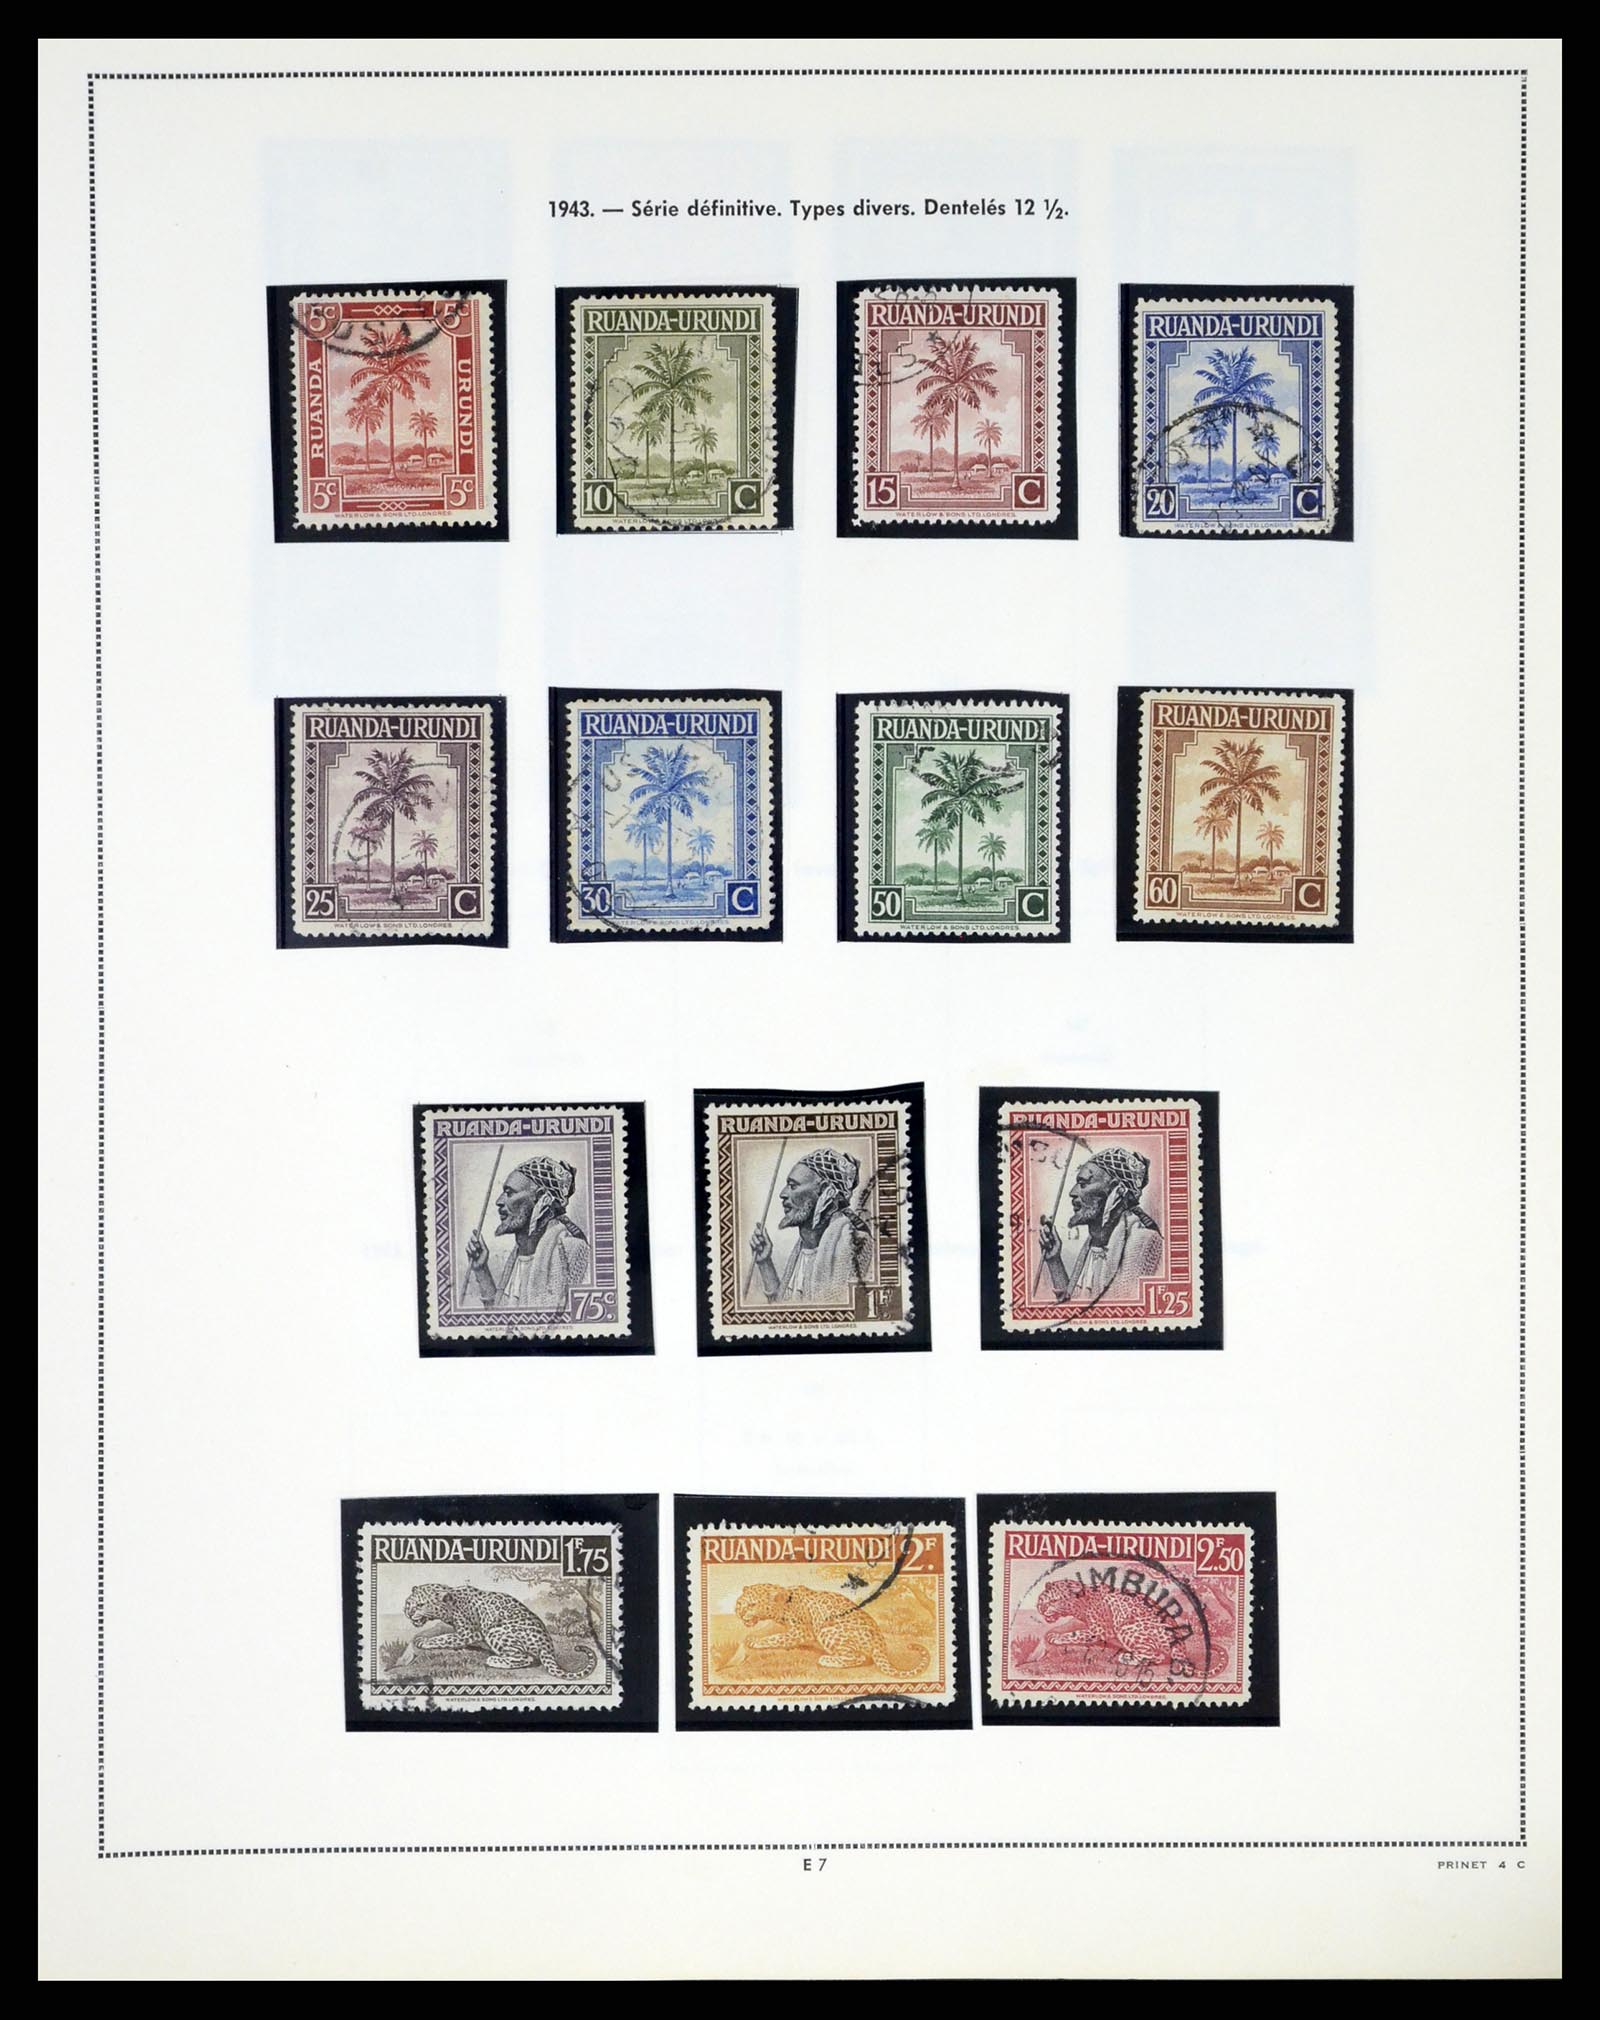 37377 062 - Stamp collection 37377 Belgian Congo 1894-1969.